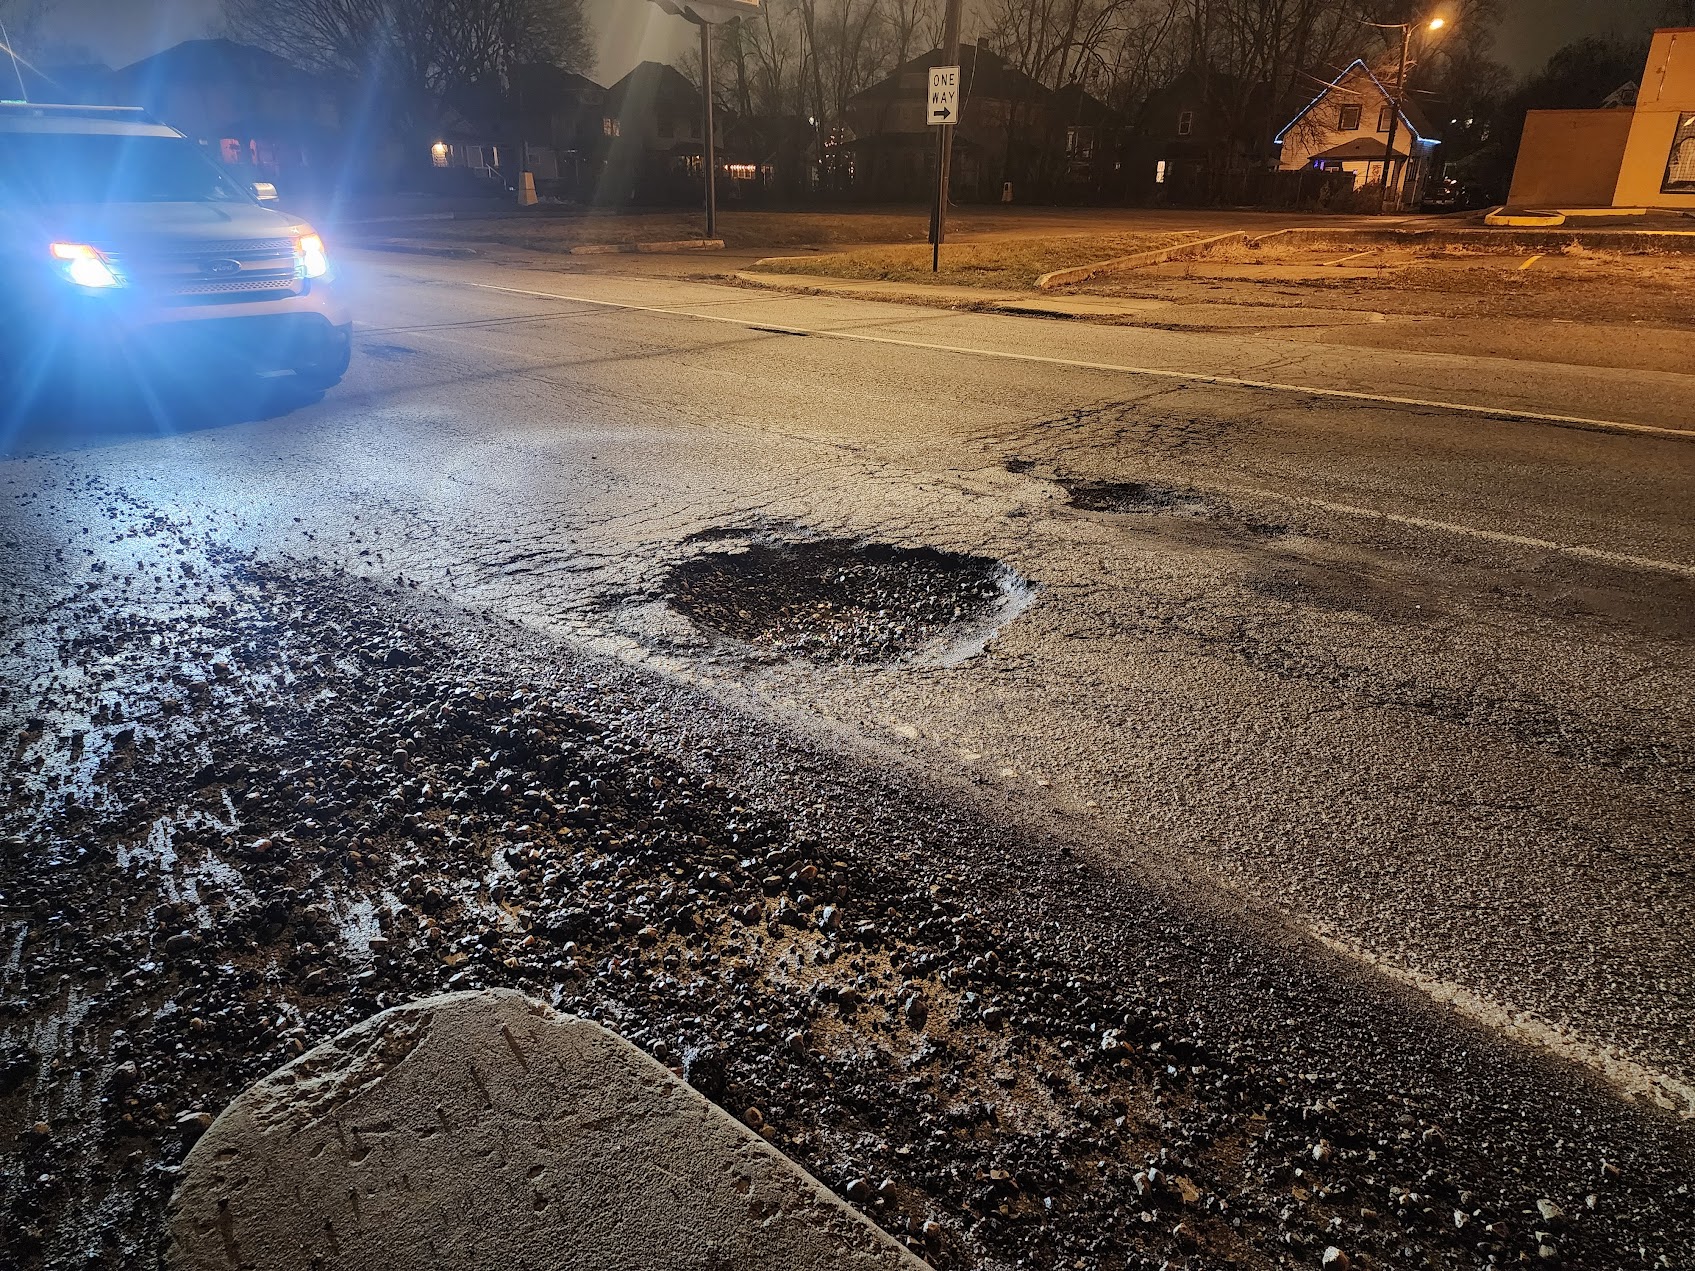 A large pothole at New York and State Streets in downtown Indy. (Provided Photo/Tharkon)